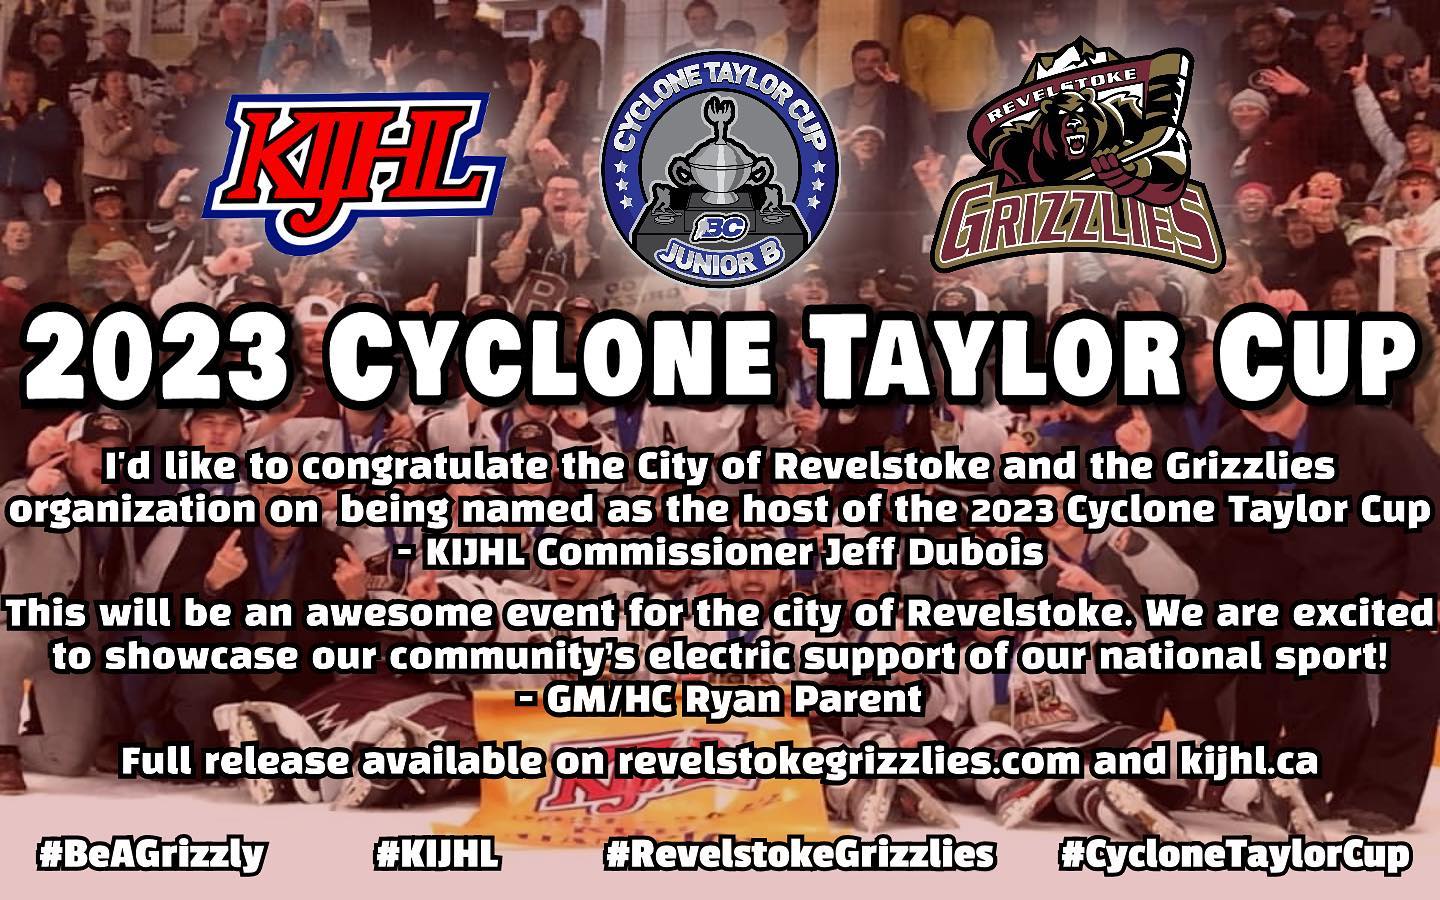 We are excited to announce, the City of Revelstoke and the Revelstoke Grizzlies will host the 2023 Cyclone Taylor Cup

@cityofrevelstoke @kijhlhockey @bchockey_source @revelstoke 

#RevelstokeGrizzlies #Revelstoke #KIJHL #BCJuniorHockey #CycloneTaylorCup #JuniorHockey #BeAGrizzly